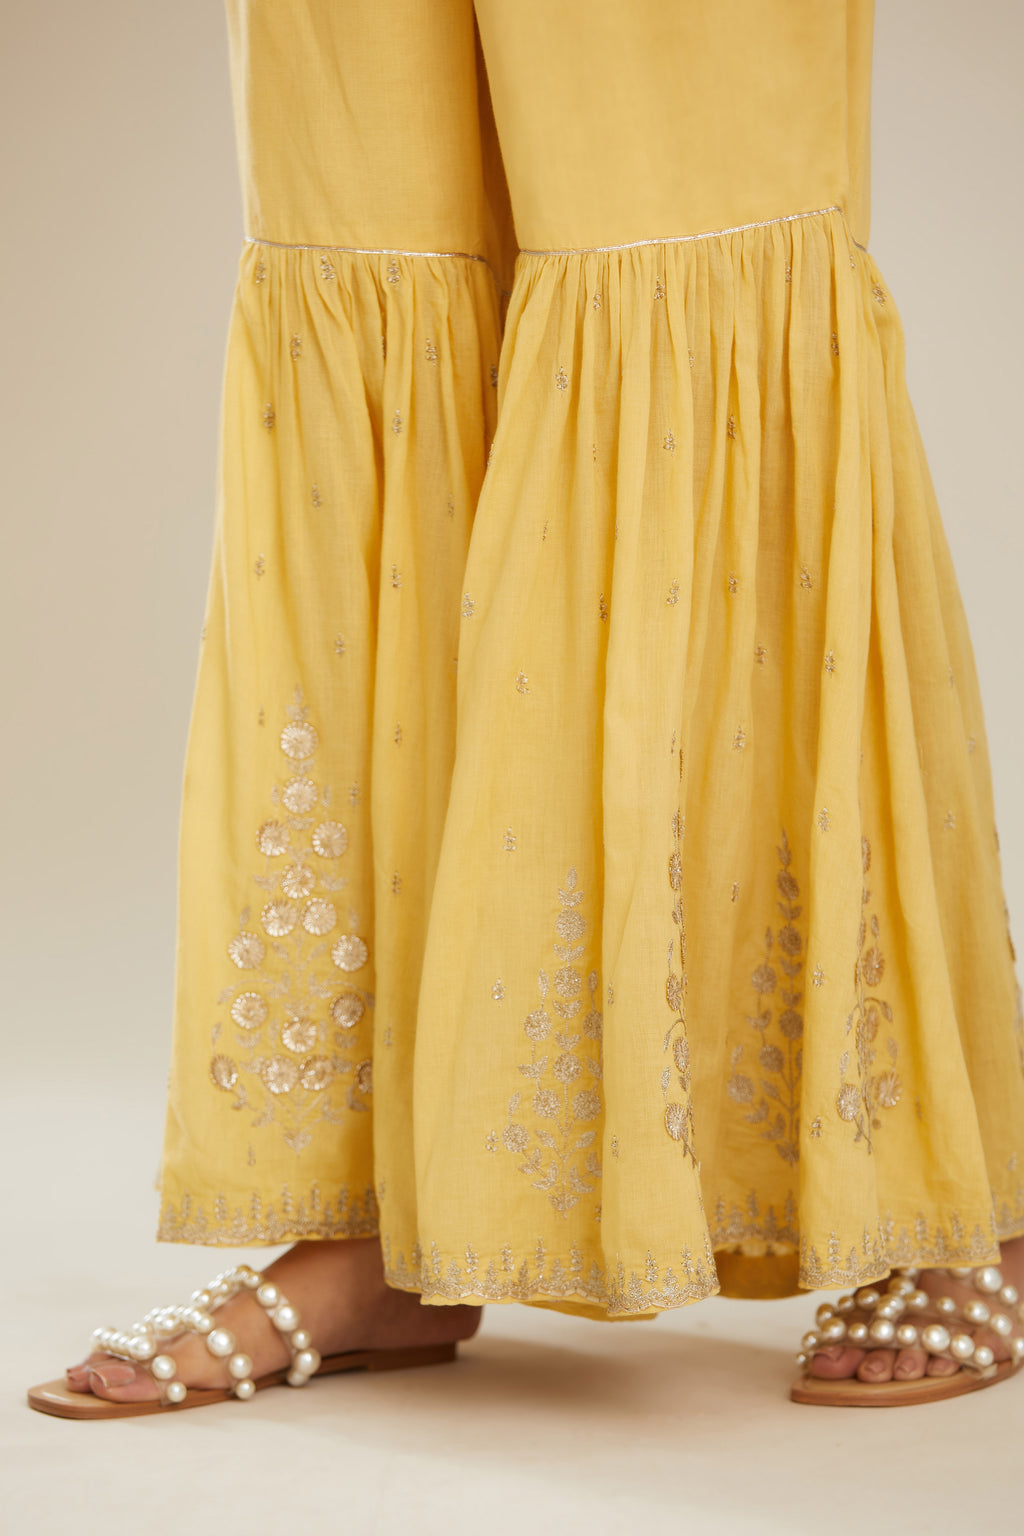 Yellow farshi with gold zari and gota embroidery and gota detailing at knee joint seam. (Farshi)